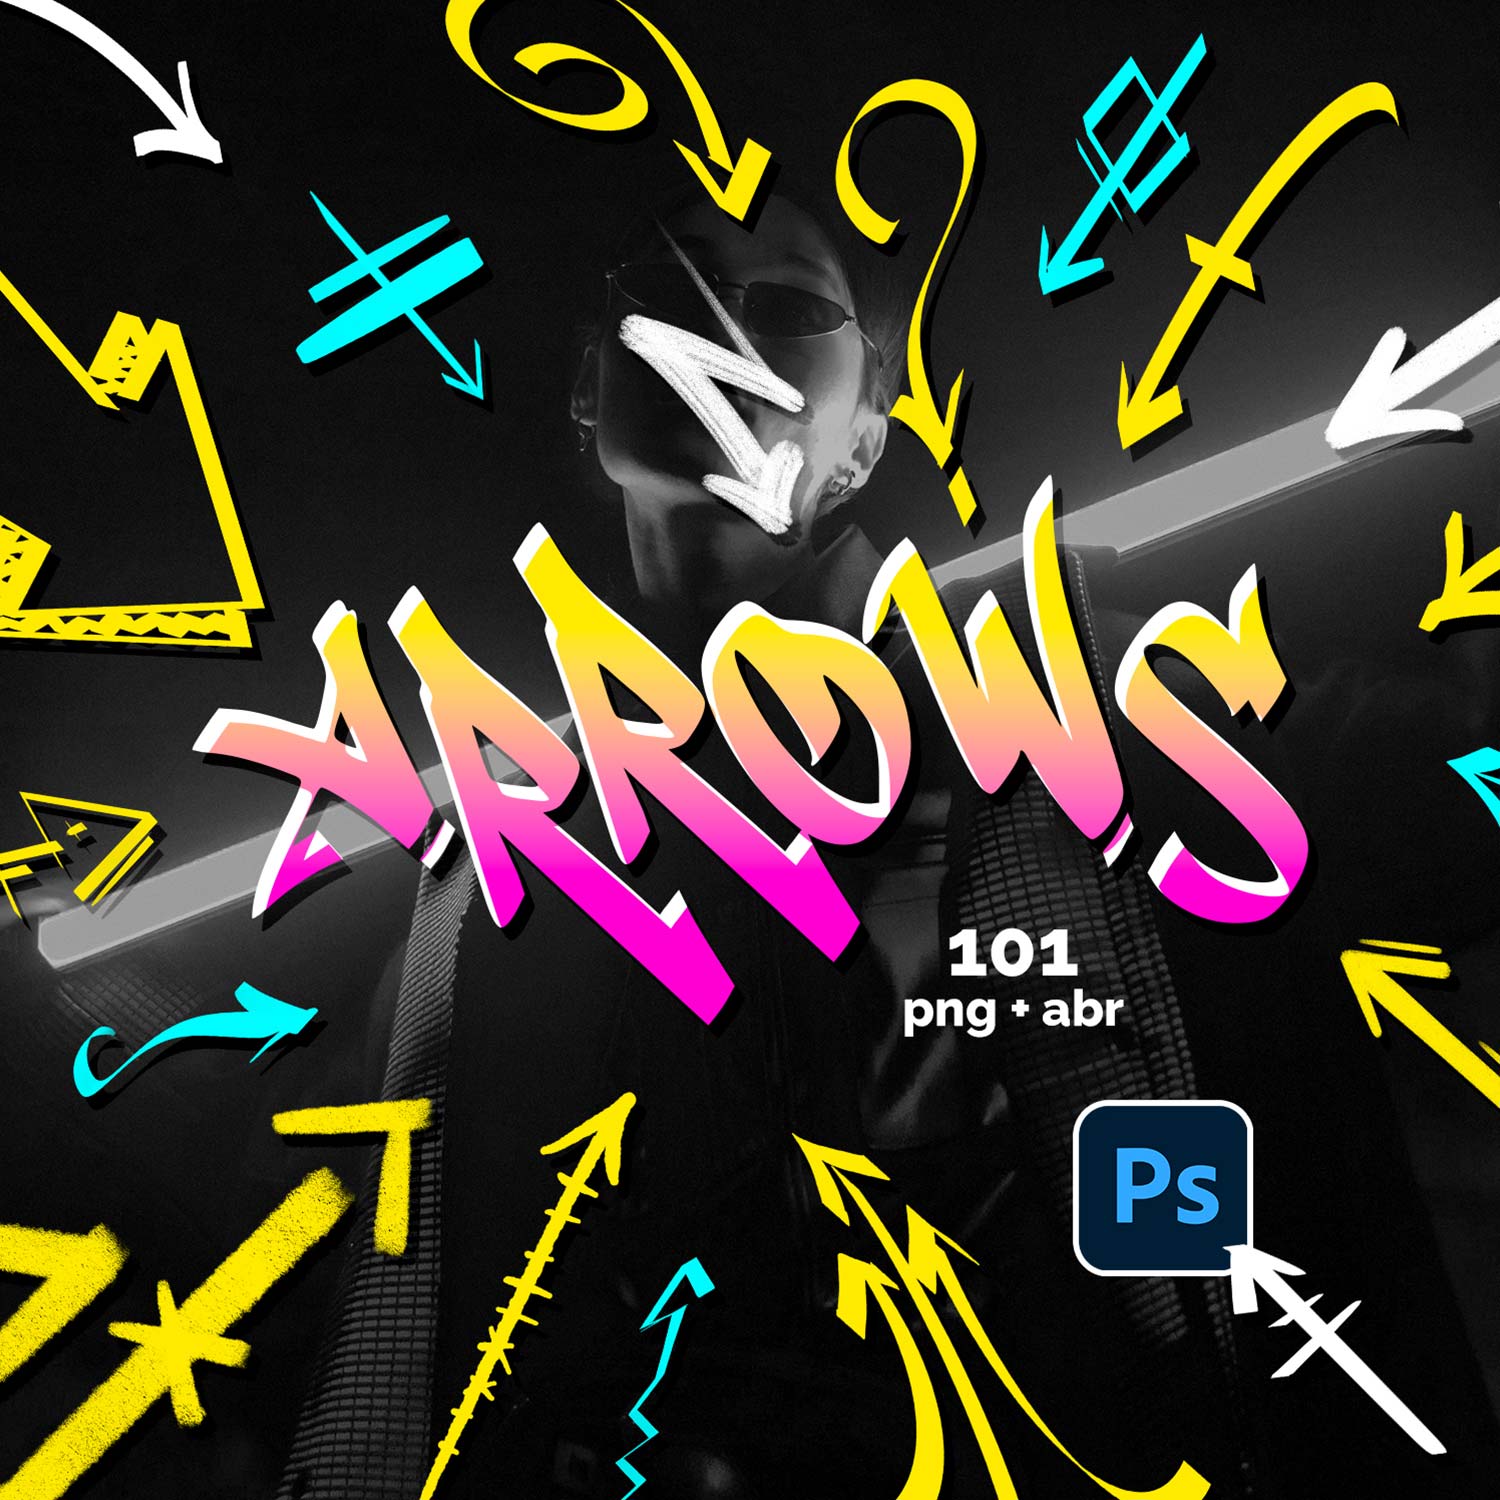 Hand drawn arrows - PNG & brush cover image.